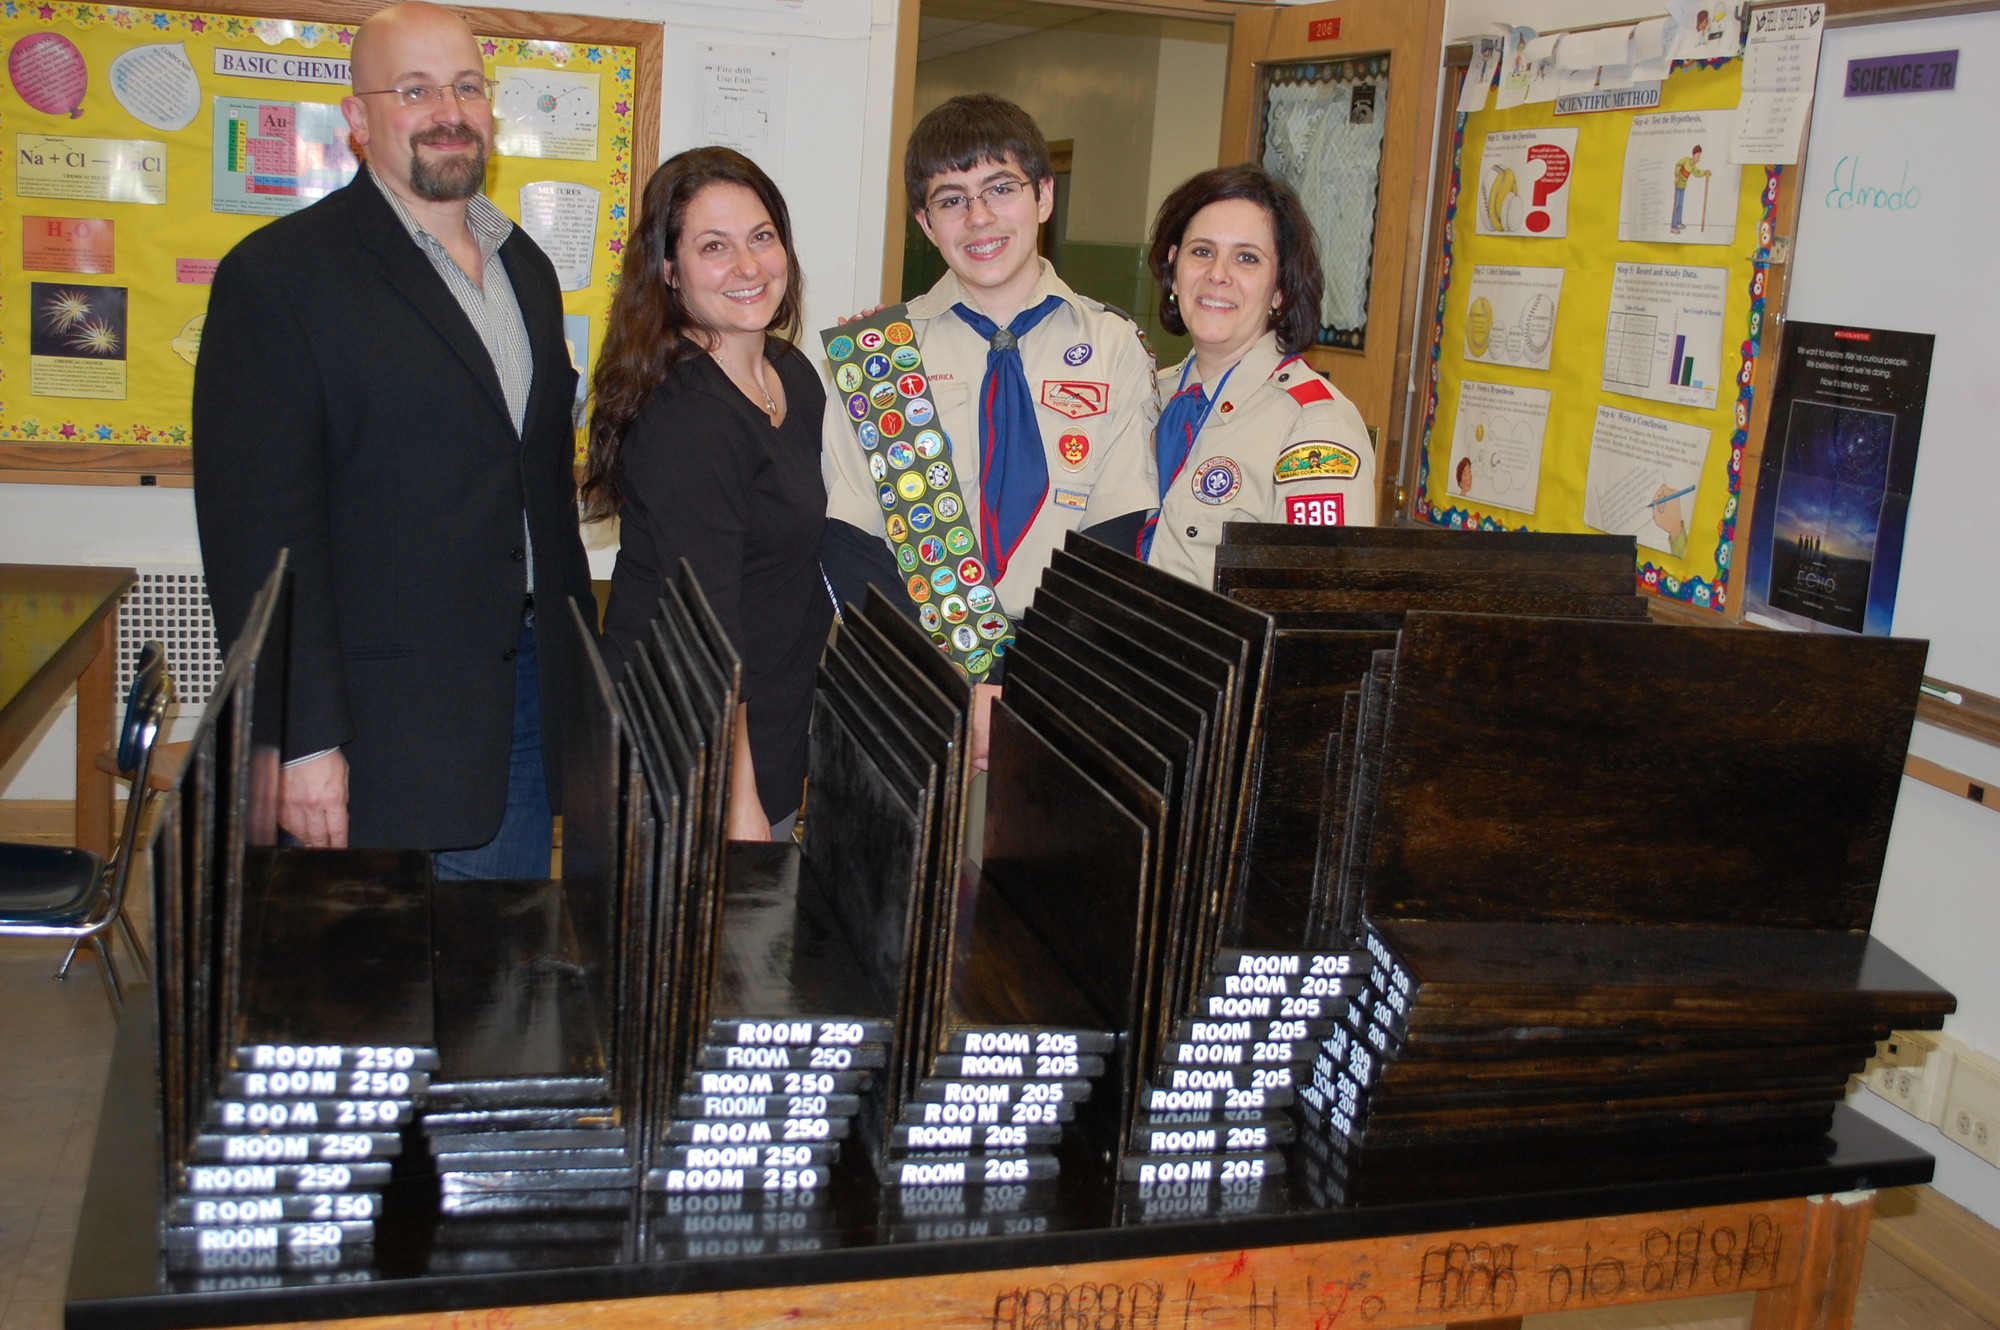 Steven Santiago, second from right, made test dividers that Memorial Junior High science teachers Angelo Stanco, Roni Franabia-Kropf and Elsie Santiago will use in their classrooms.